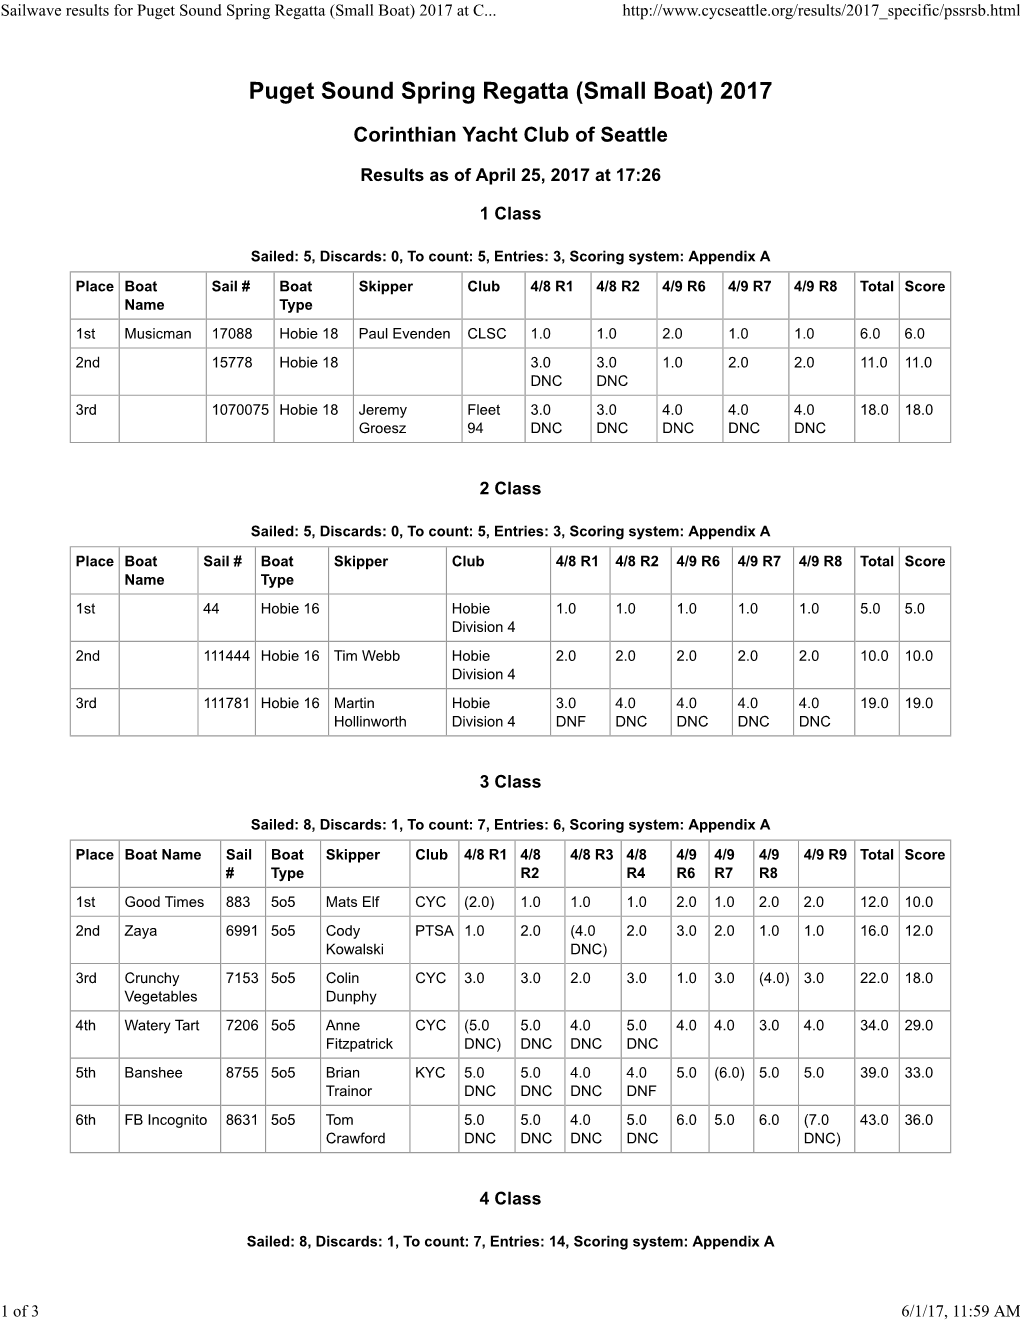 Sailwave Results for Puget Sound Spring Regatta (Small Boat) 2017 at C